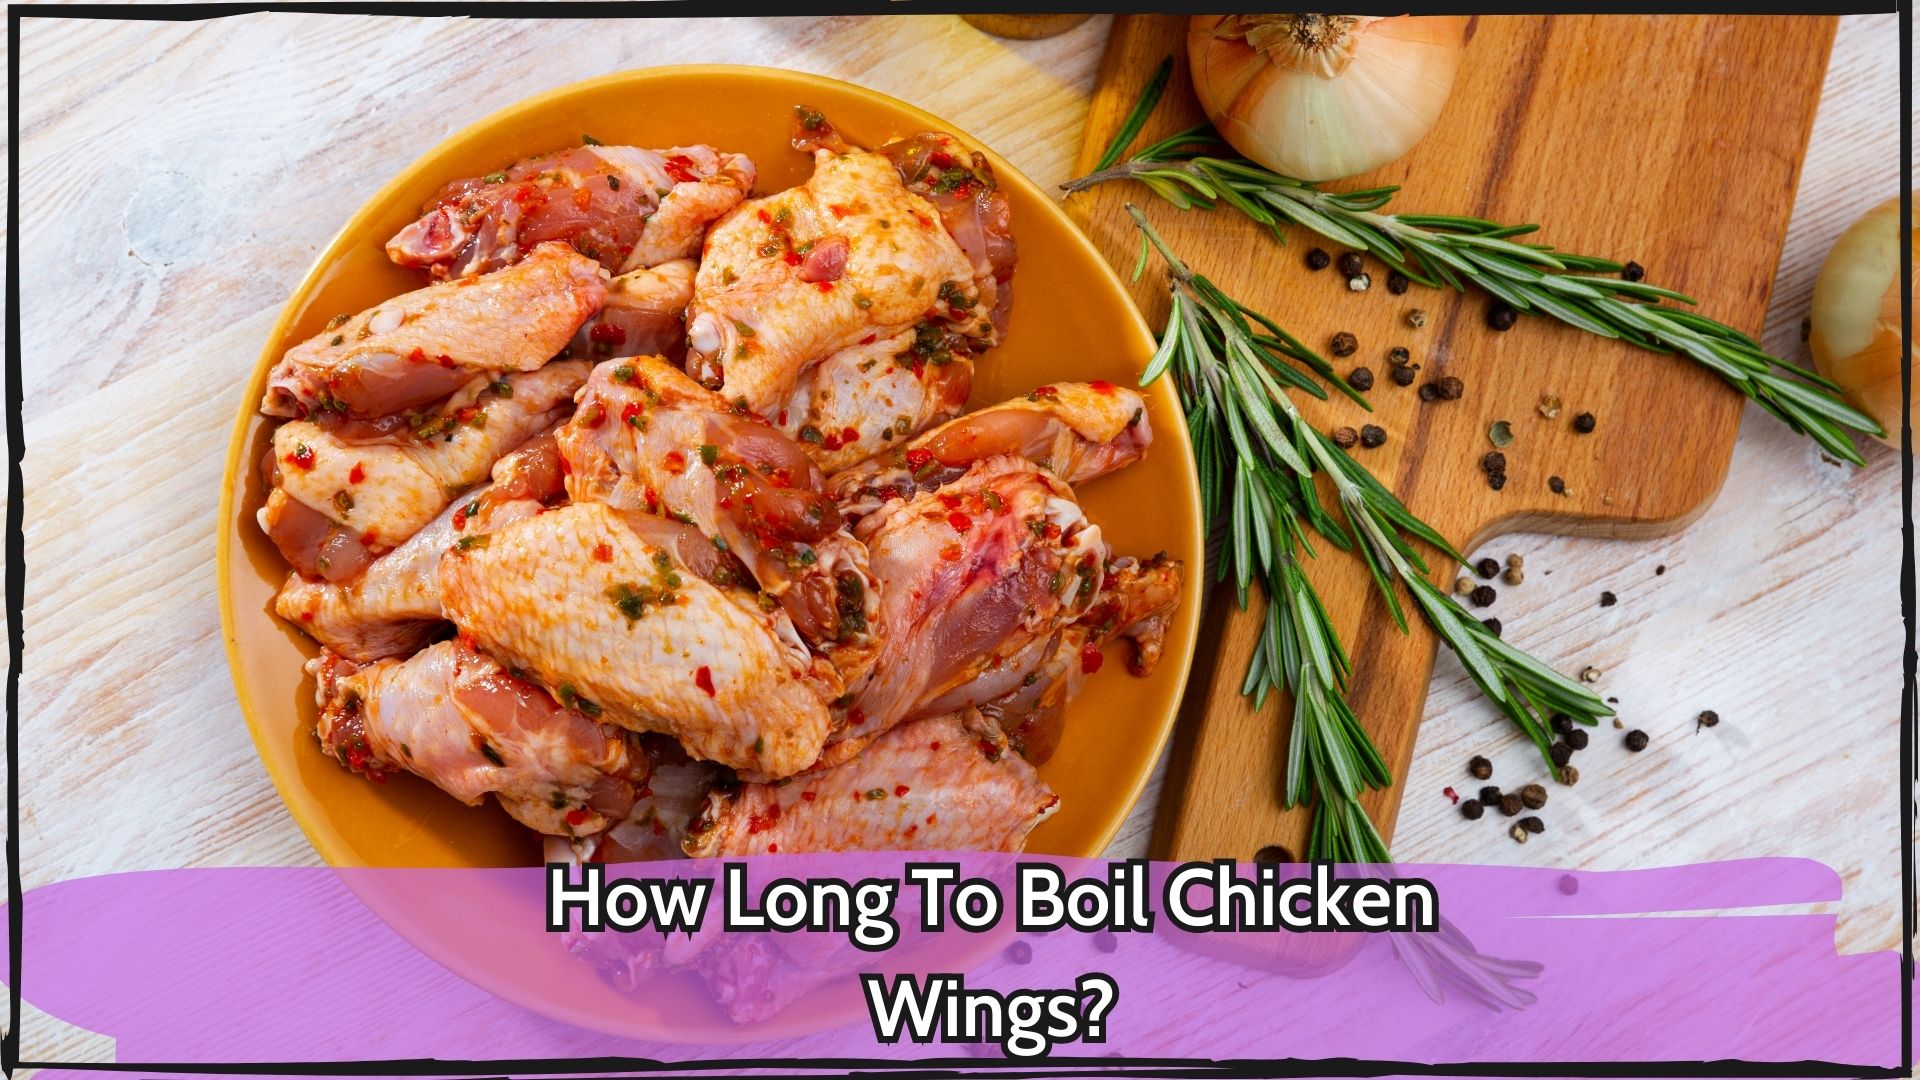 How To Boil Chicken Wings?